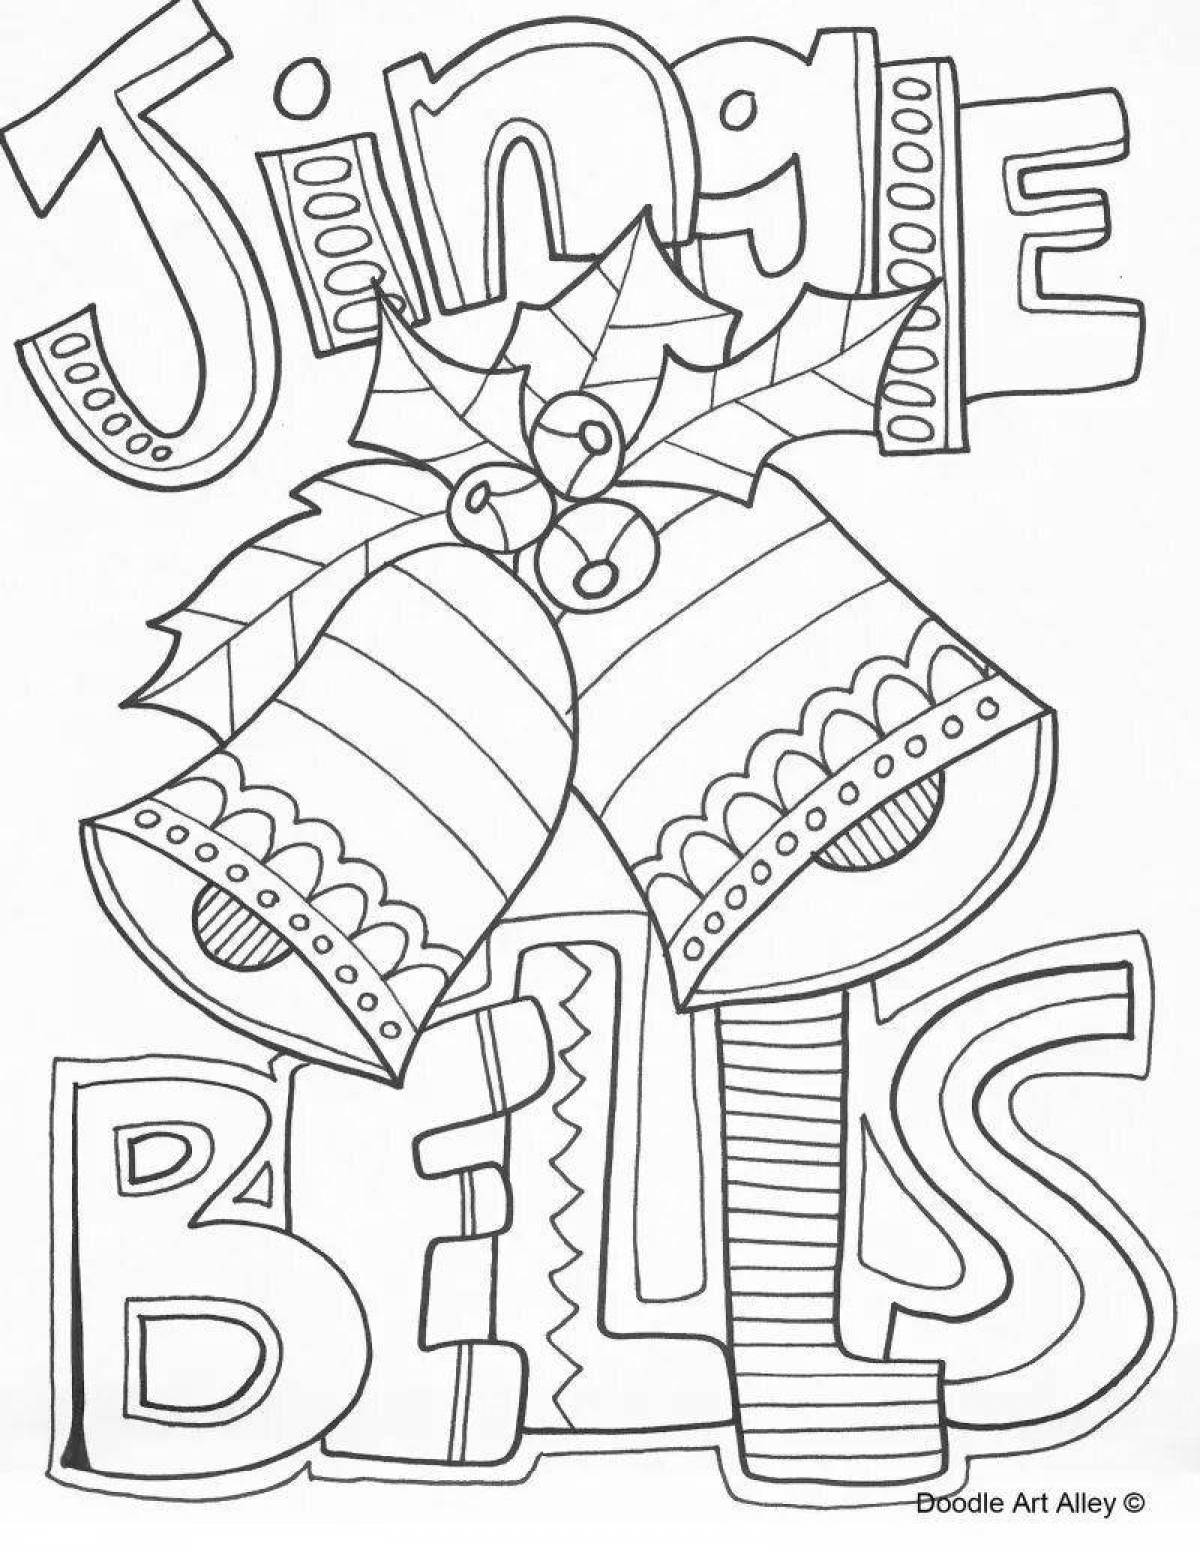 Lovely jingle bells coloring book